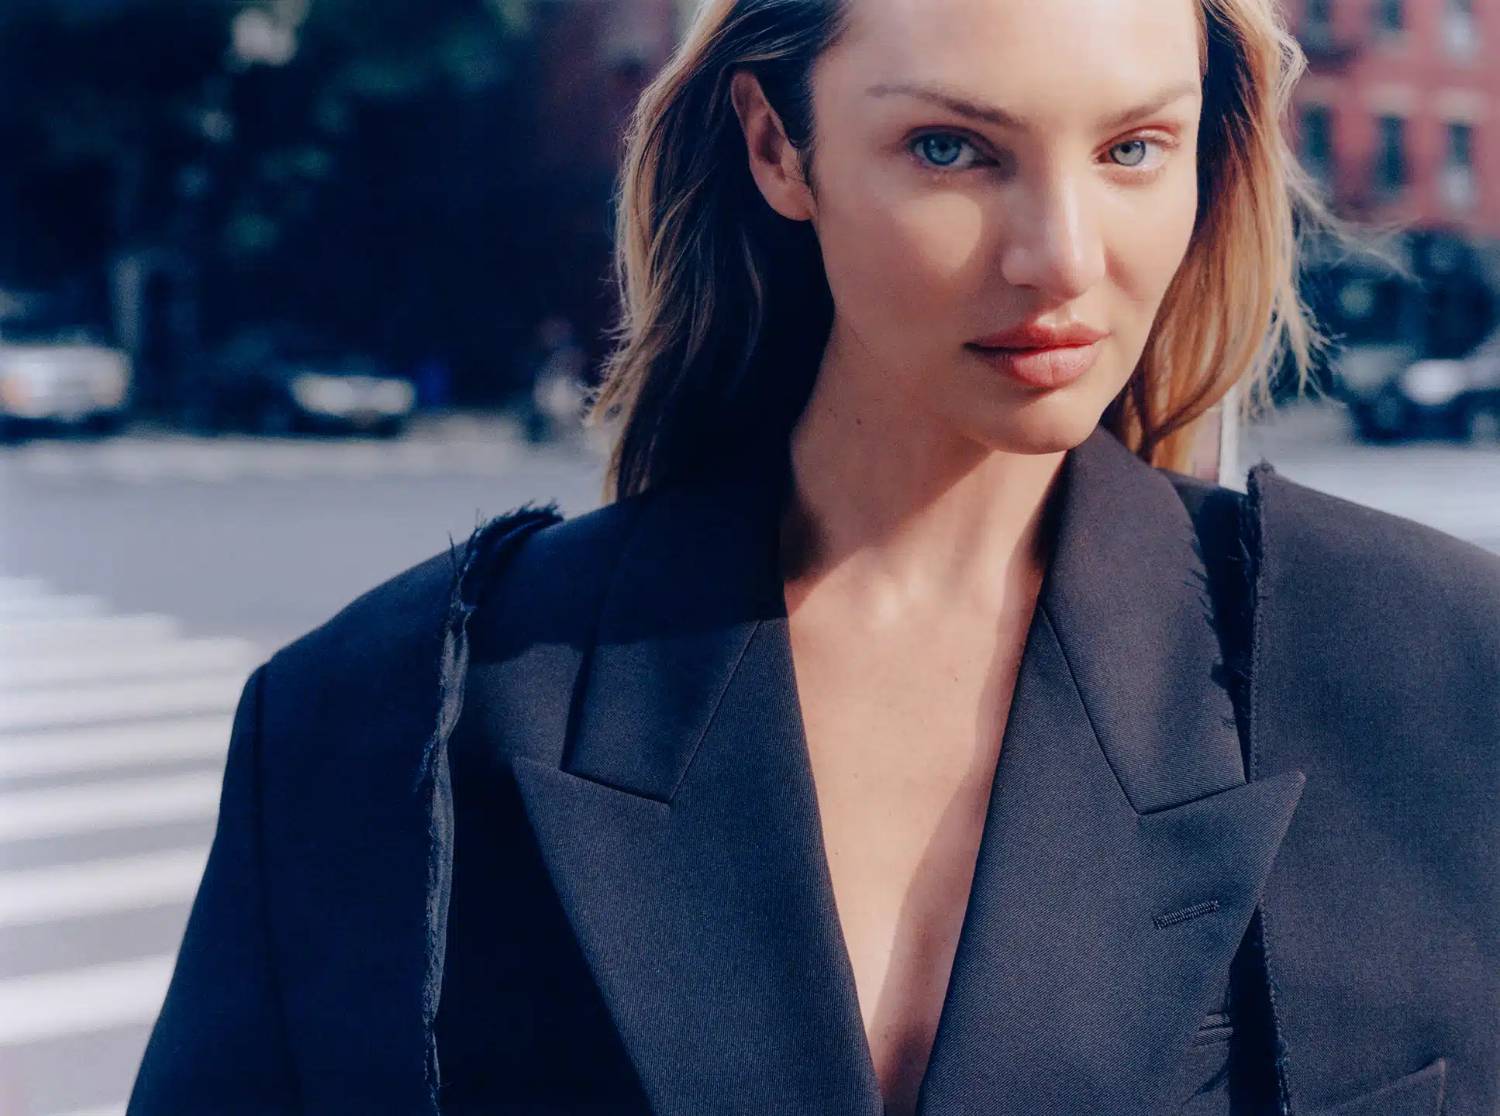 Candice Swanepoel in The Row Black Coat by Heather Hazzan for Puss Puss Magazine Fall-Winter 2023